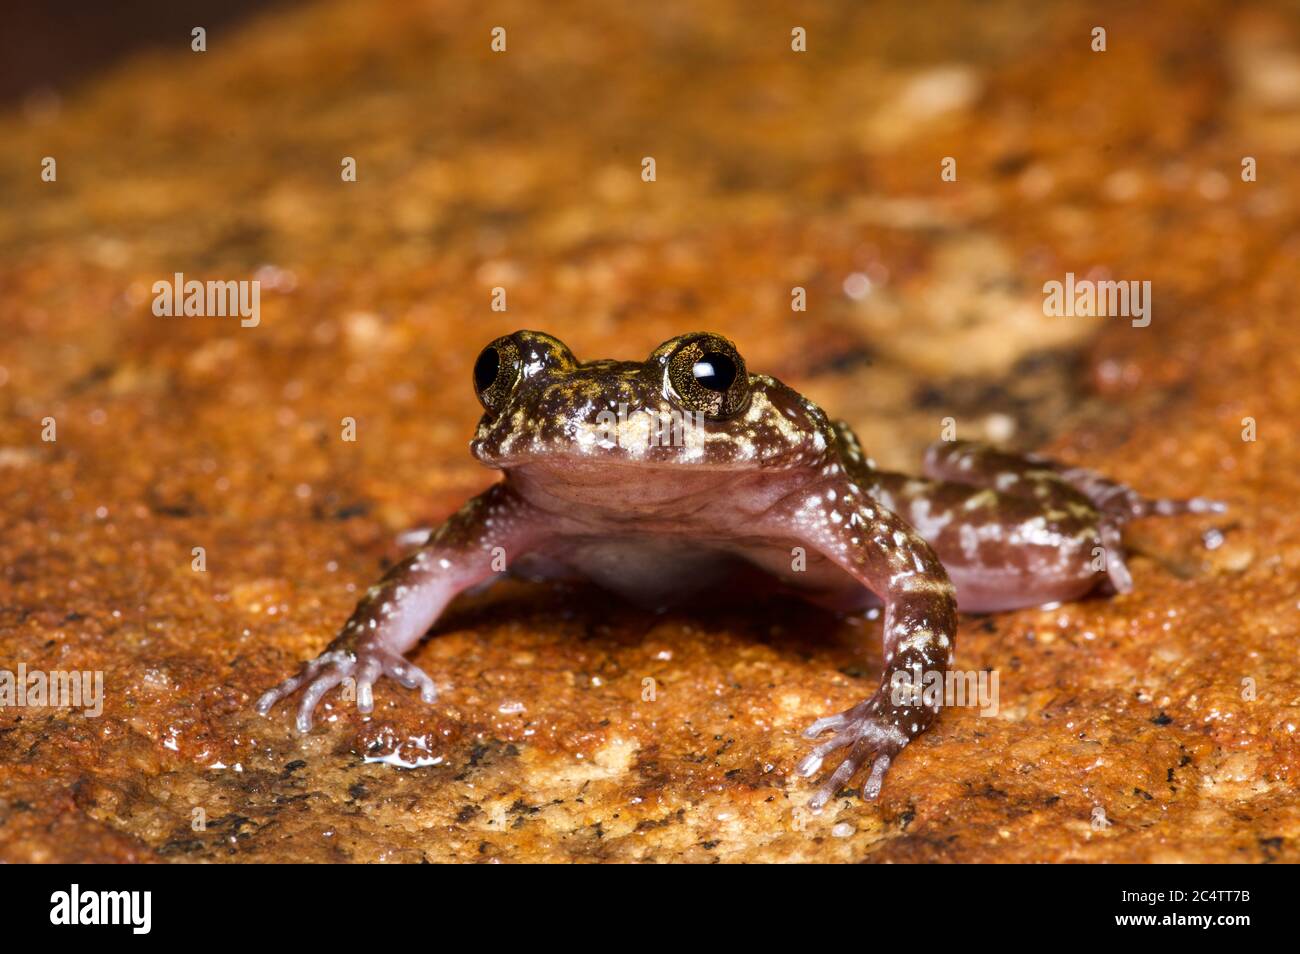 A critically endangered Marbled Streamlined Frog (Nannophrys marmorata) on a wet rock in Knuckles Forest Reserve, Sri Lanka Stock Photo